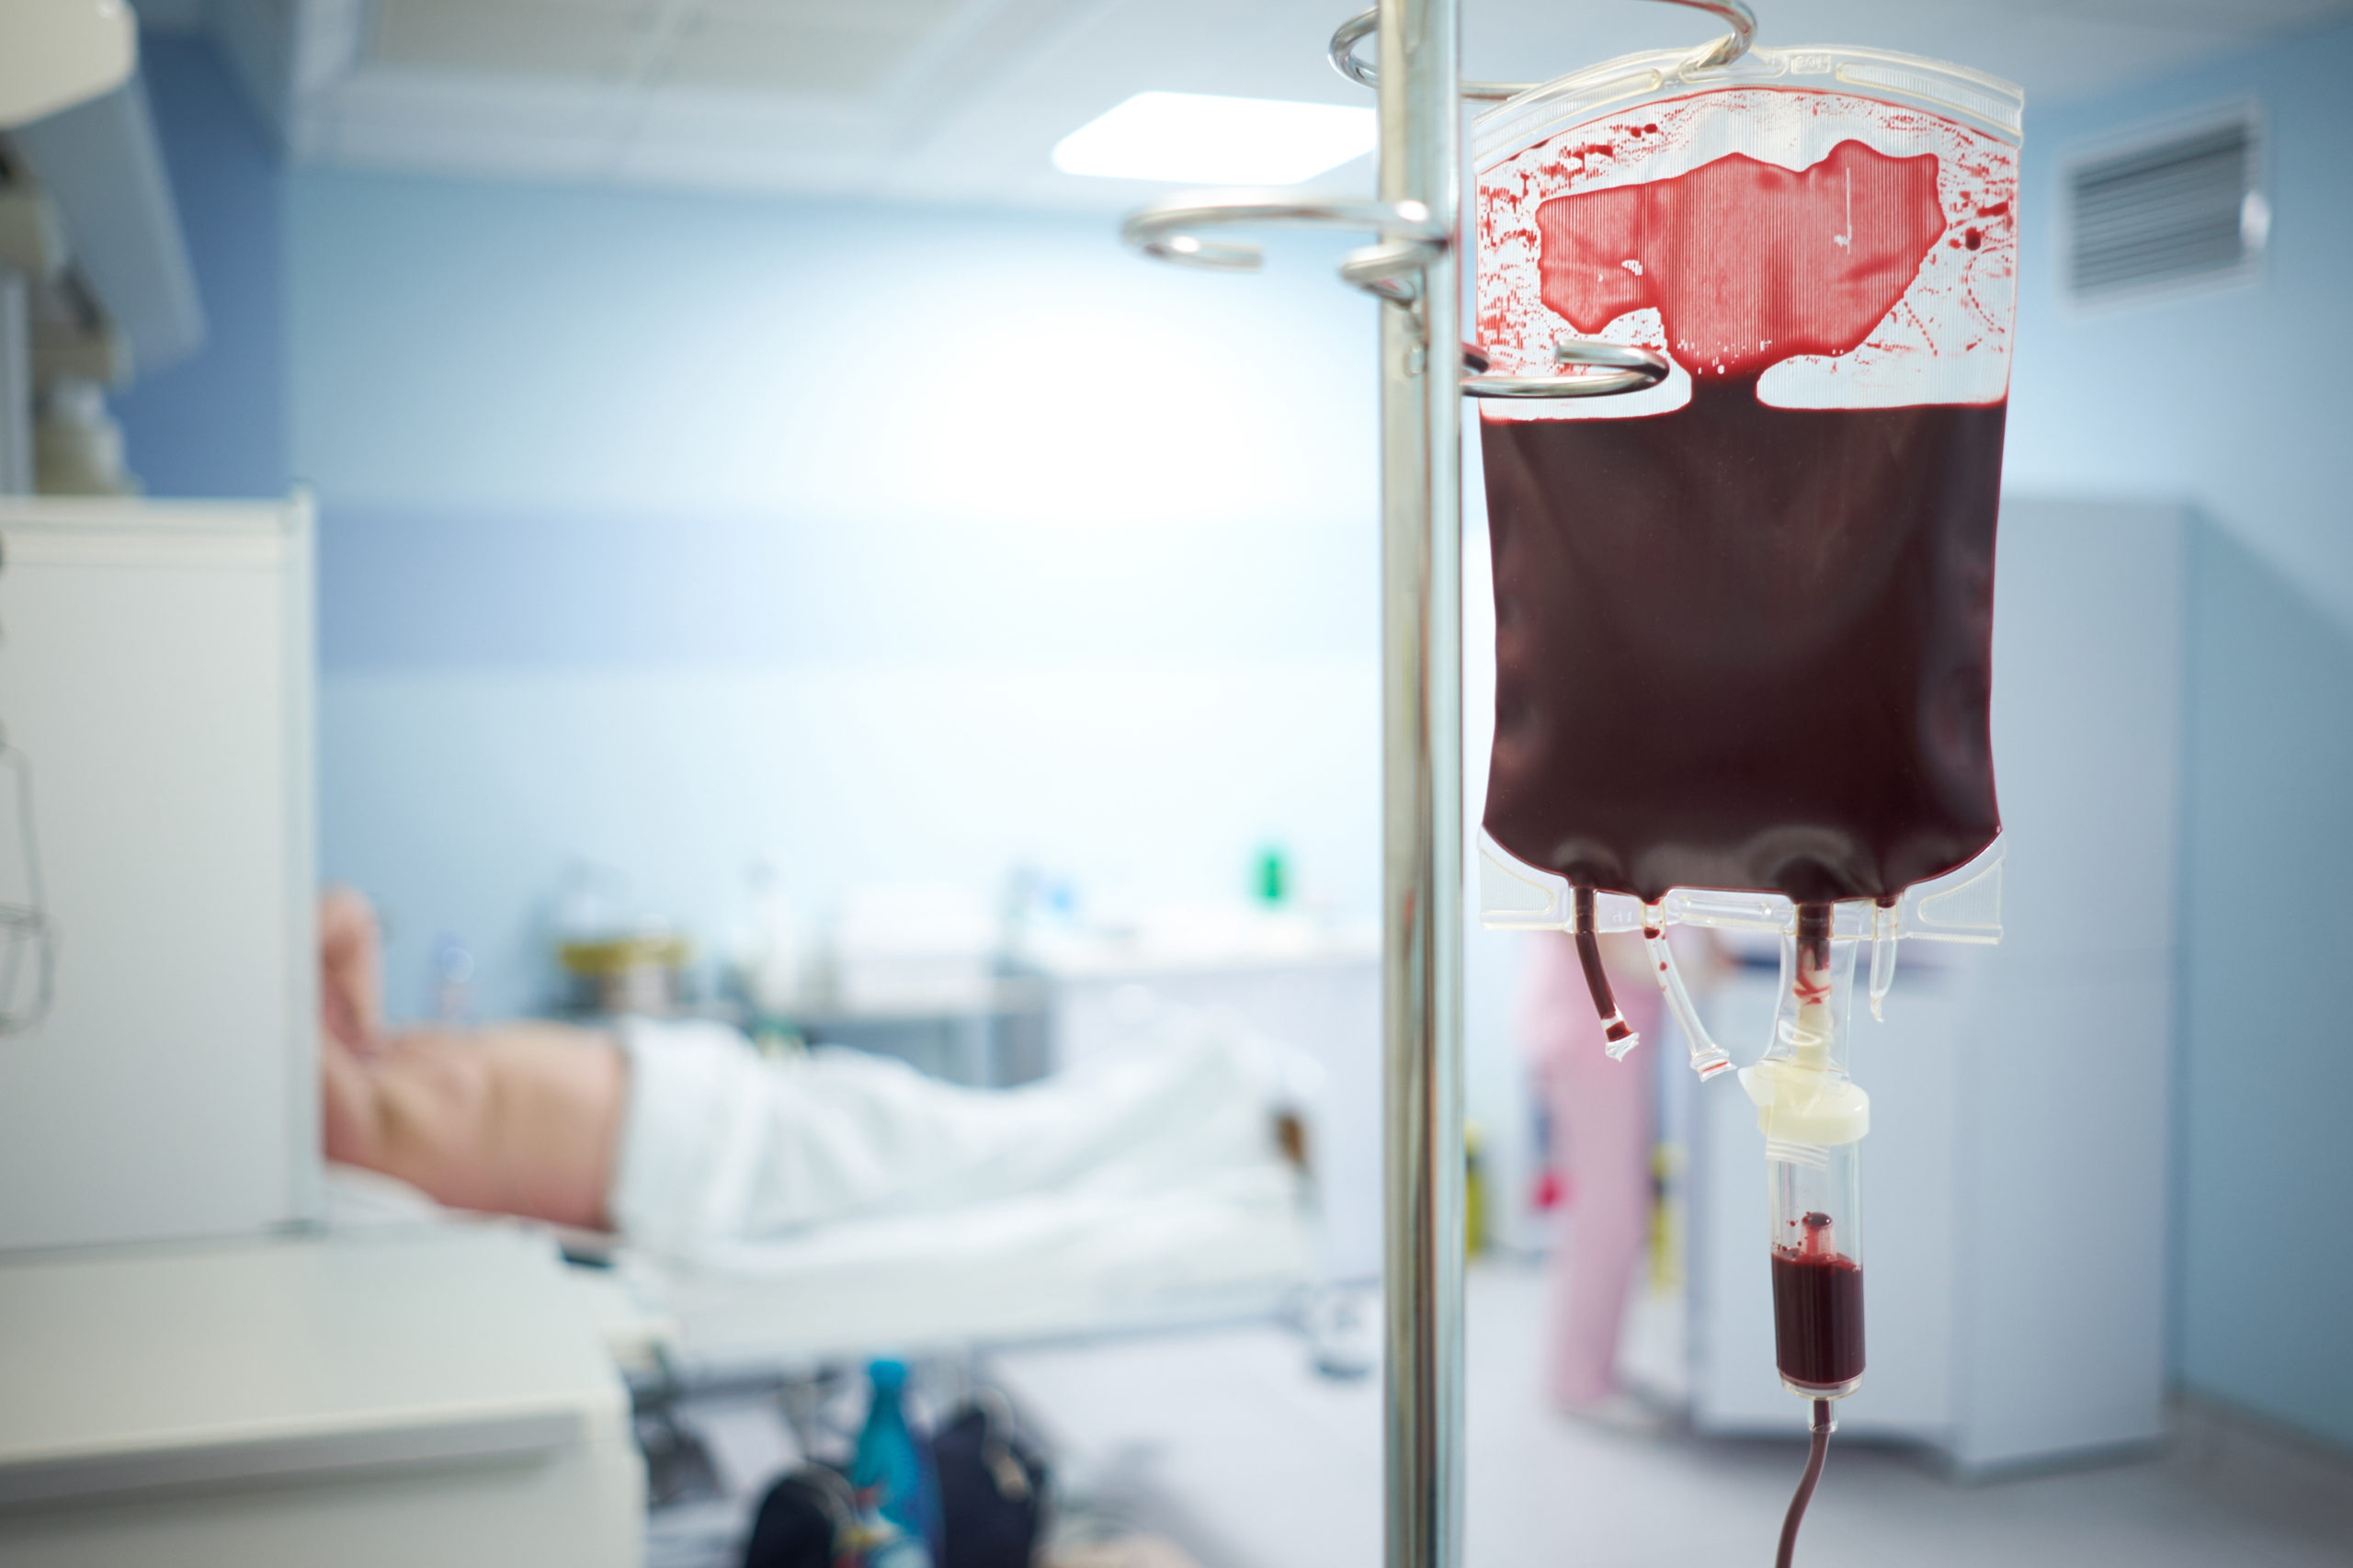 Who gets transfusions?